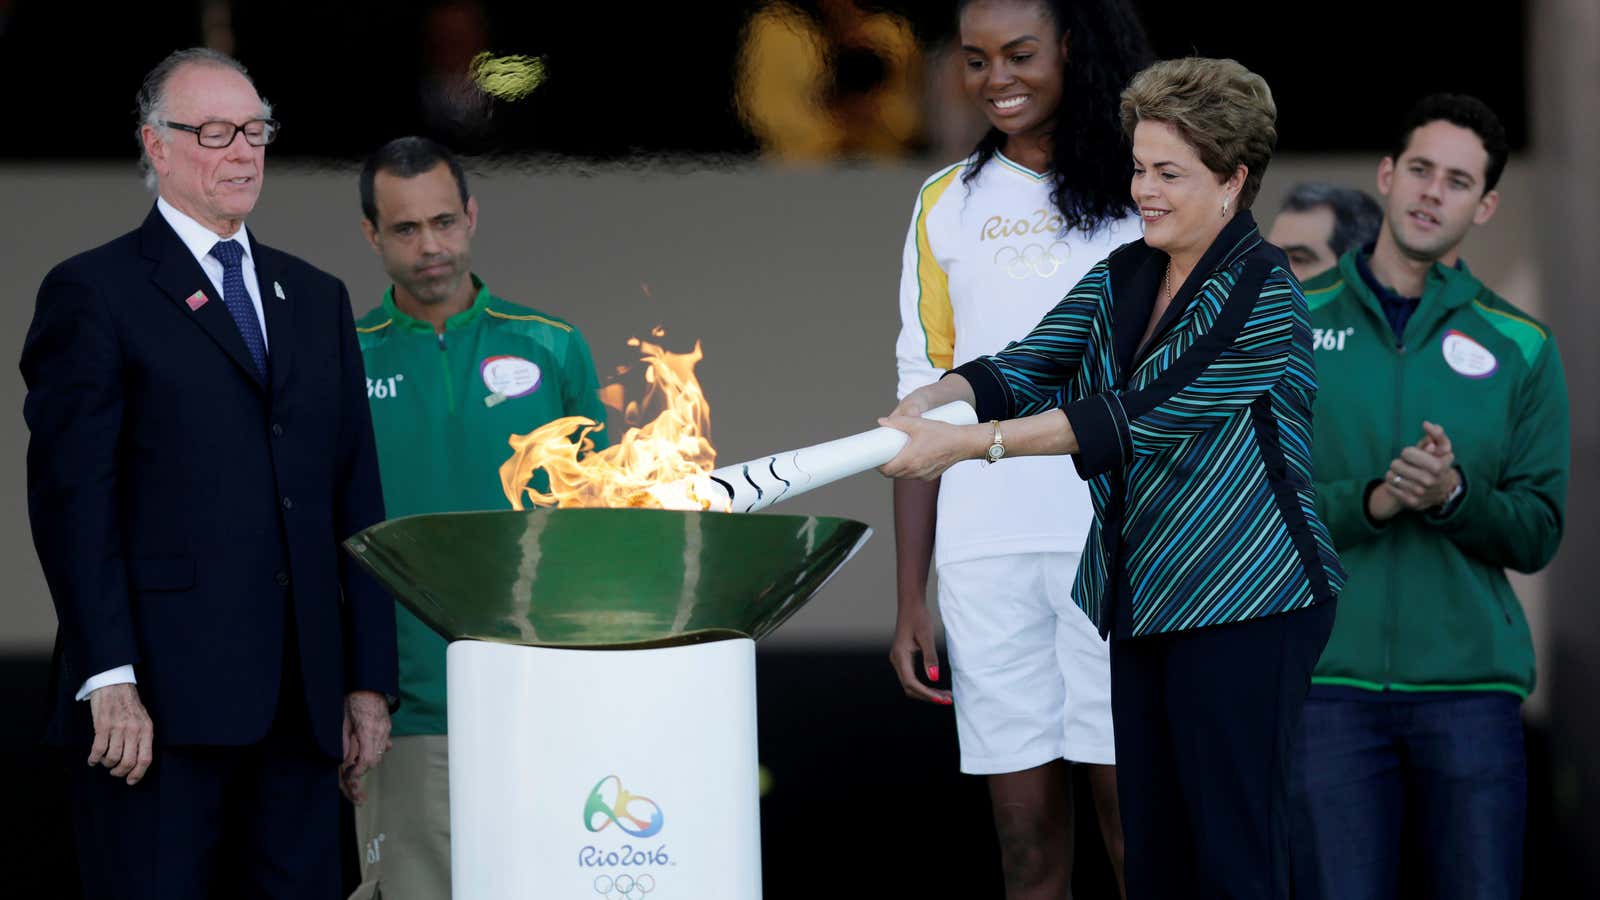 At least she got to carry the torch for a bit.